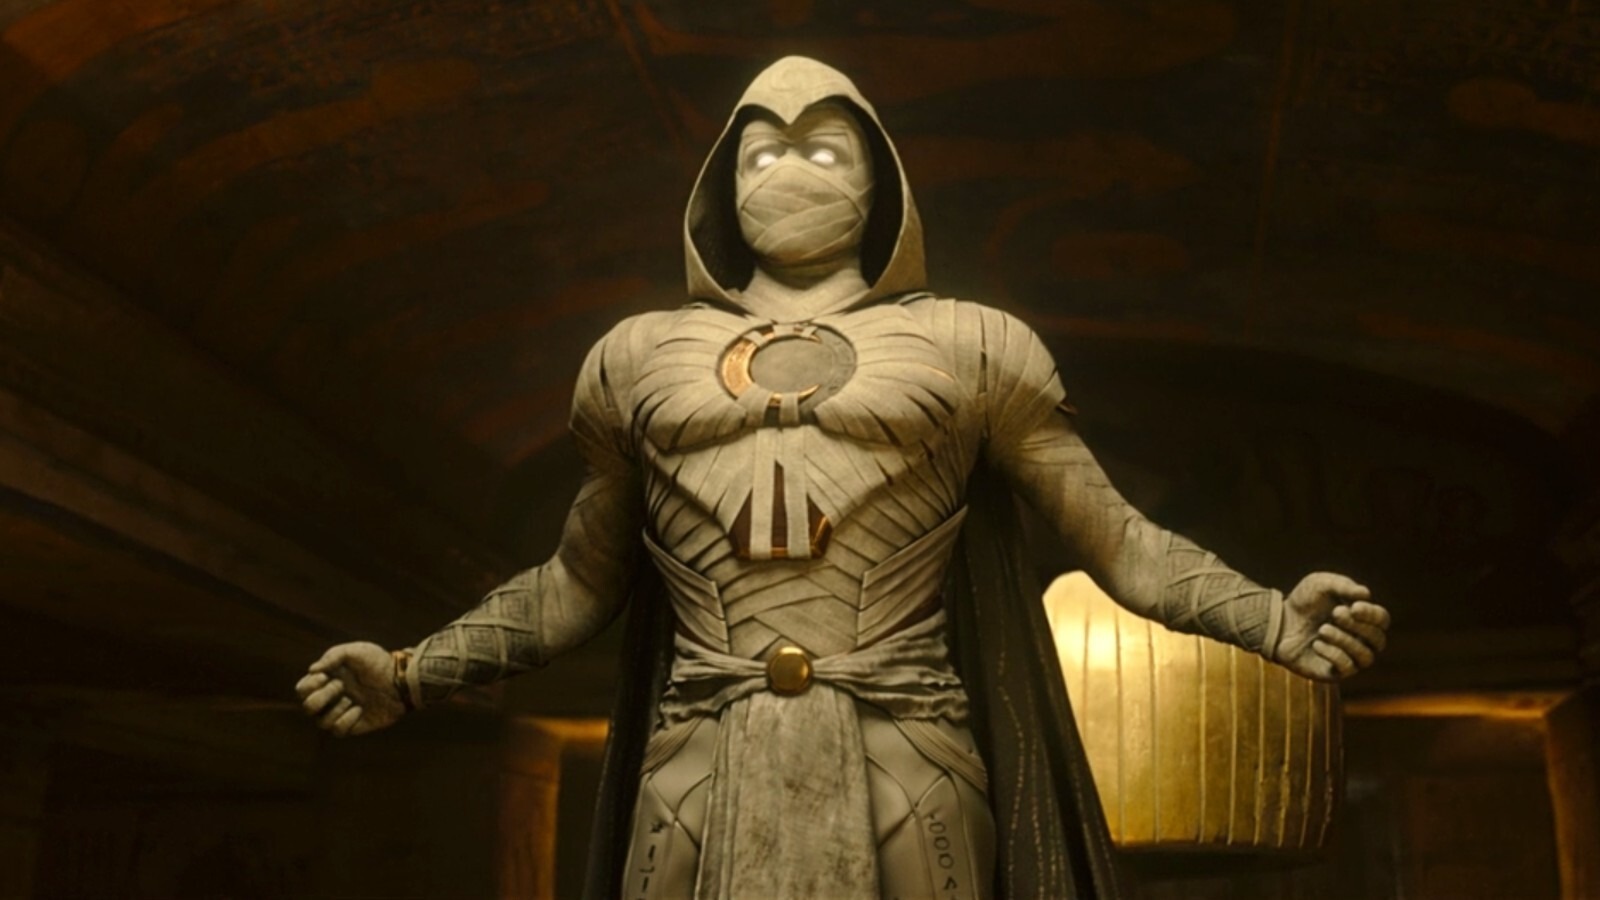 Moon Knight Season 1 Ending Explained: The Only Way Forward Is Together